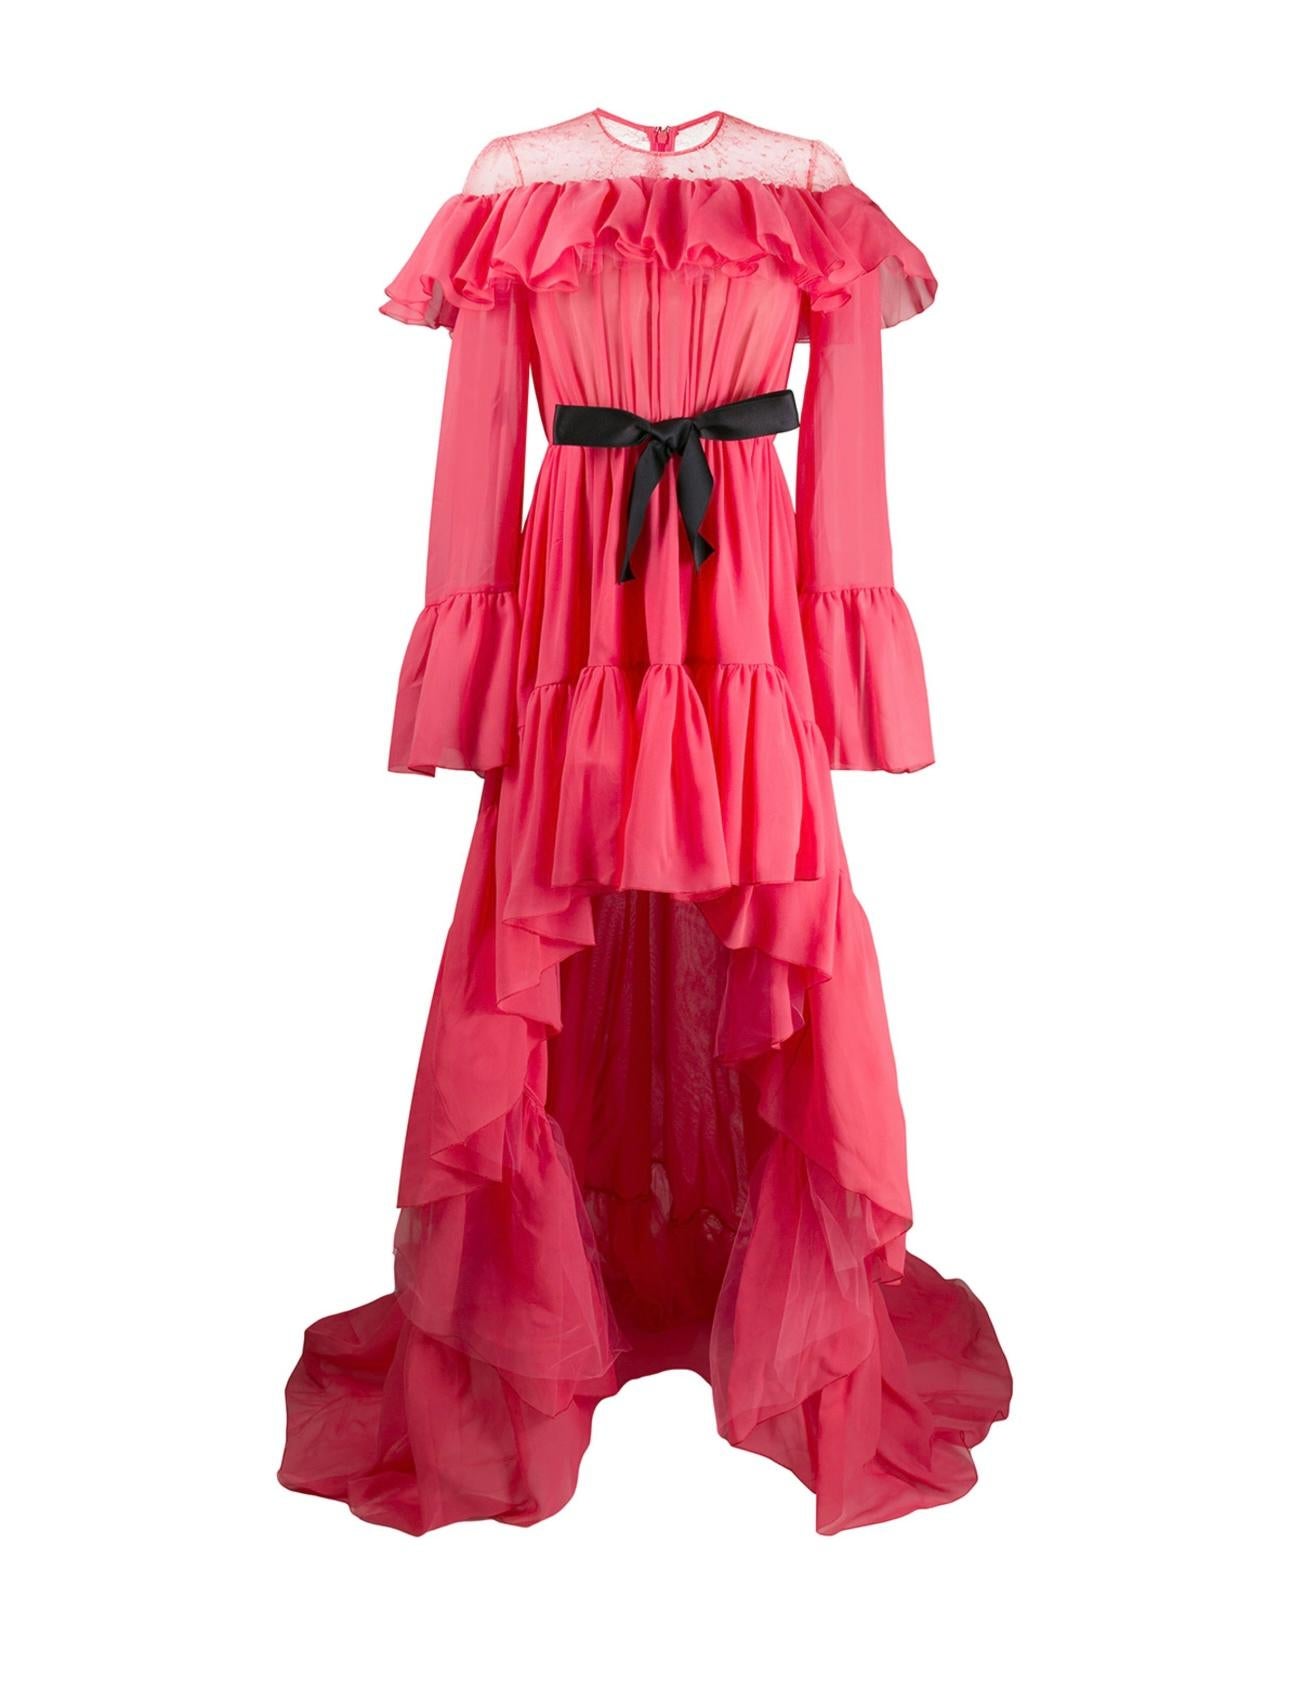 Giambattista Valli Hot Pink Silk Ruffled Gown with Lace Shoulders and Black Bow For Sale 3